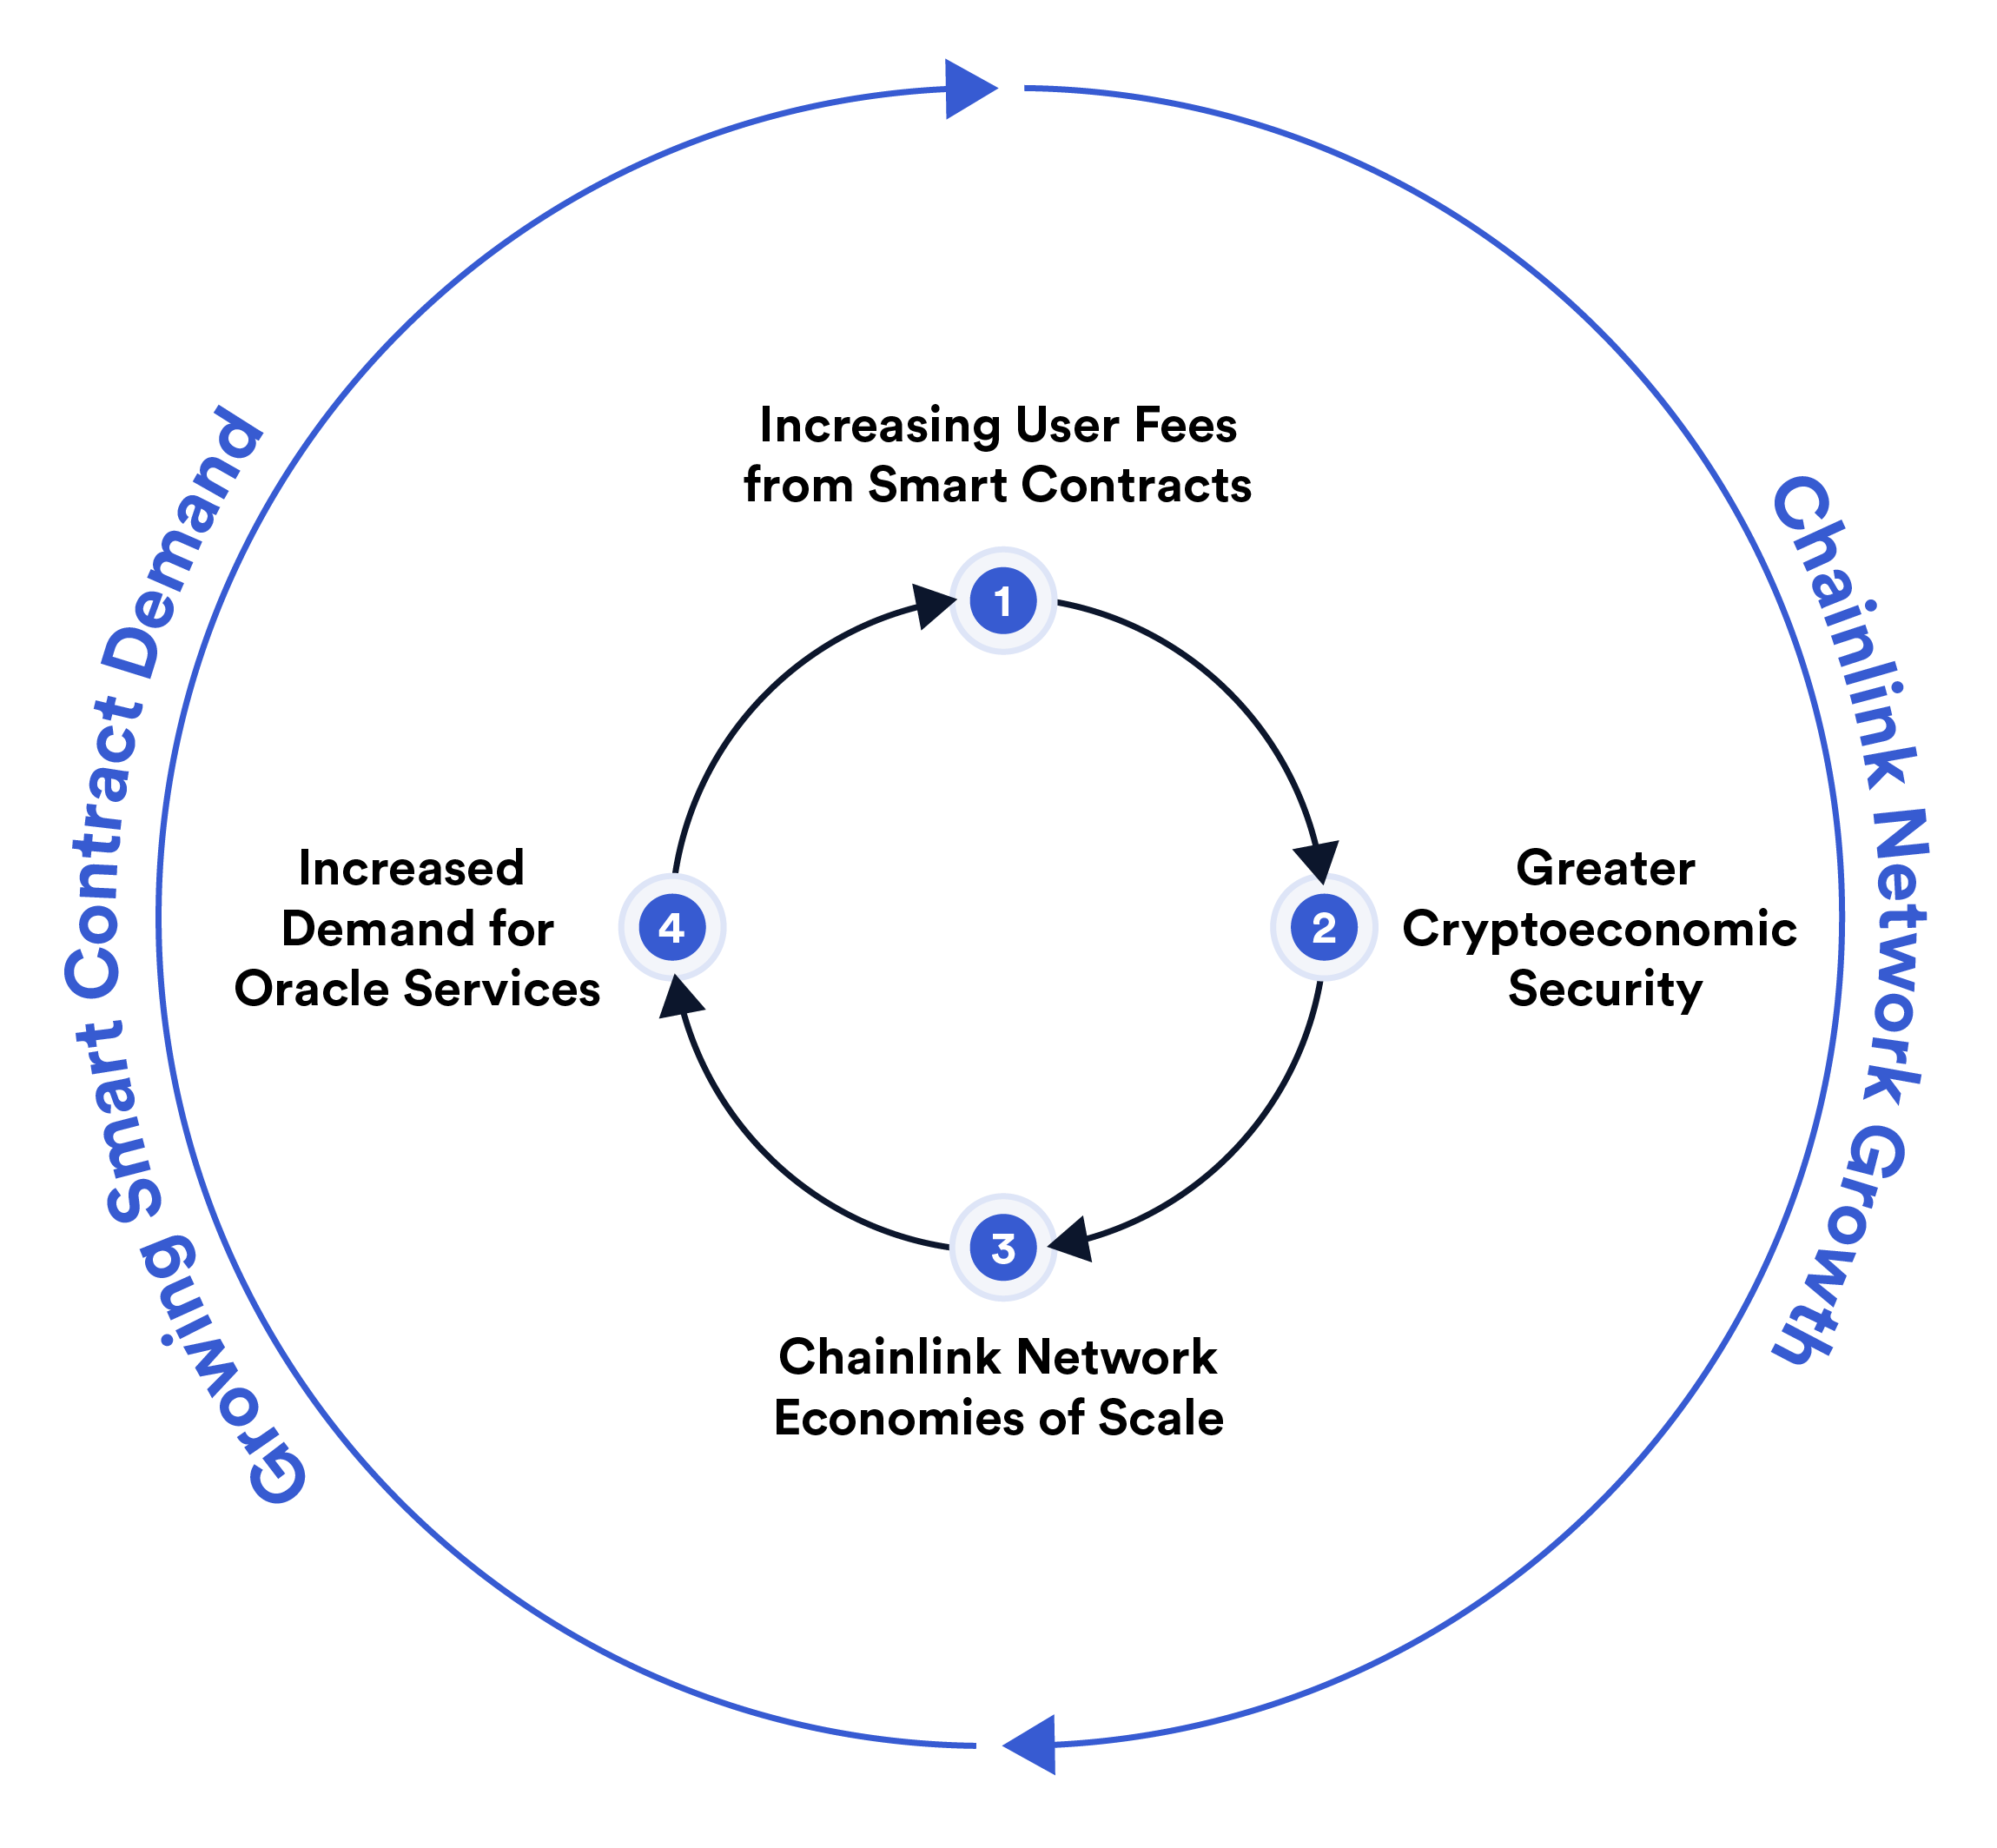 An image showing how the Chainlink Network aims for a virtuous cycle of cryptoeconomic security in which additional user fees incentivize increased node security, which drives more data on-chain.